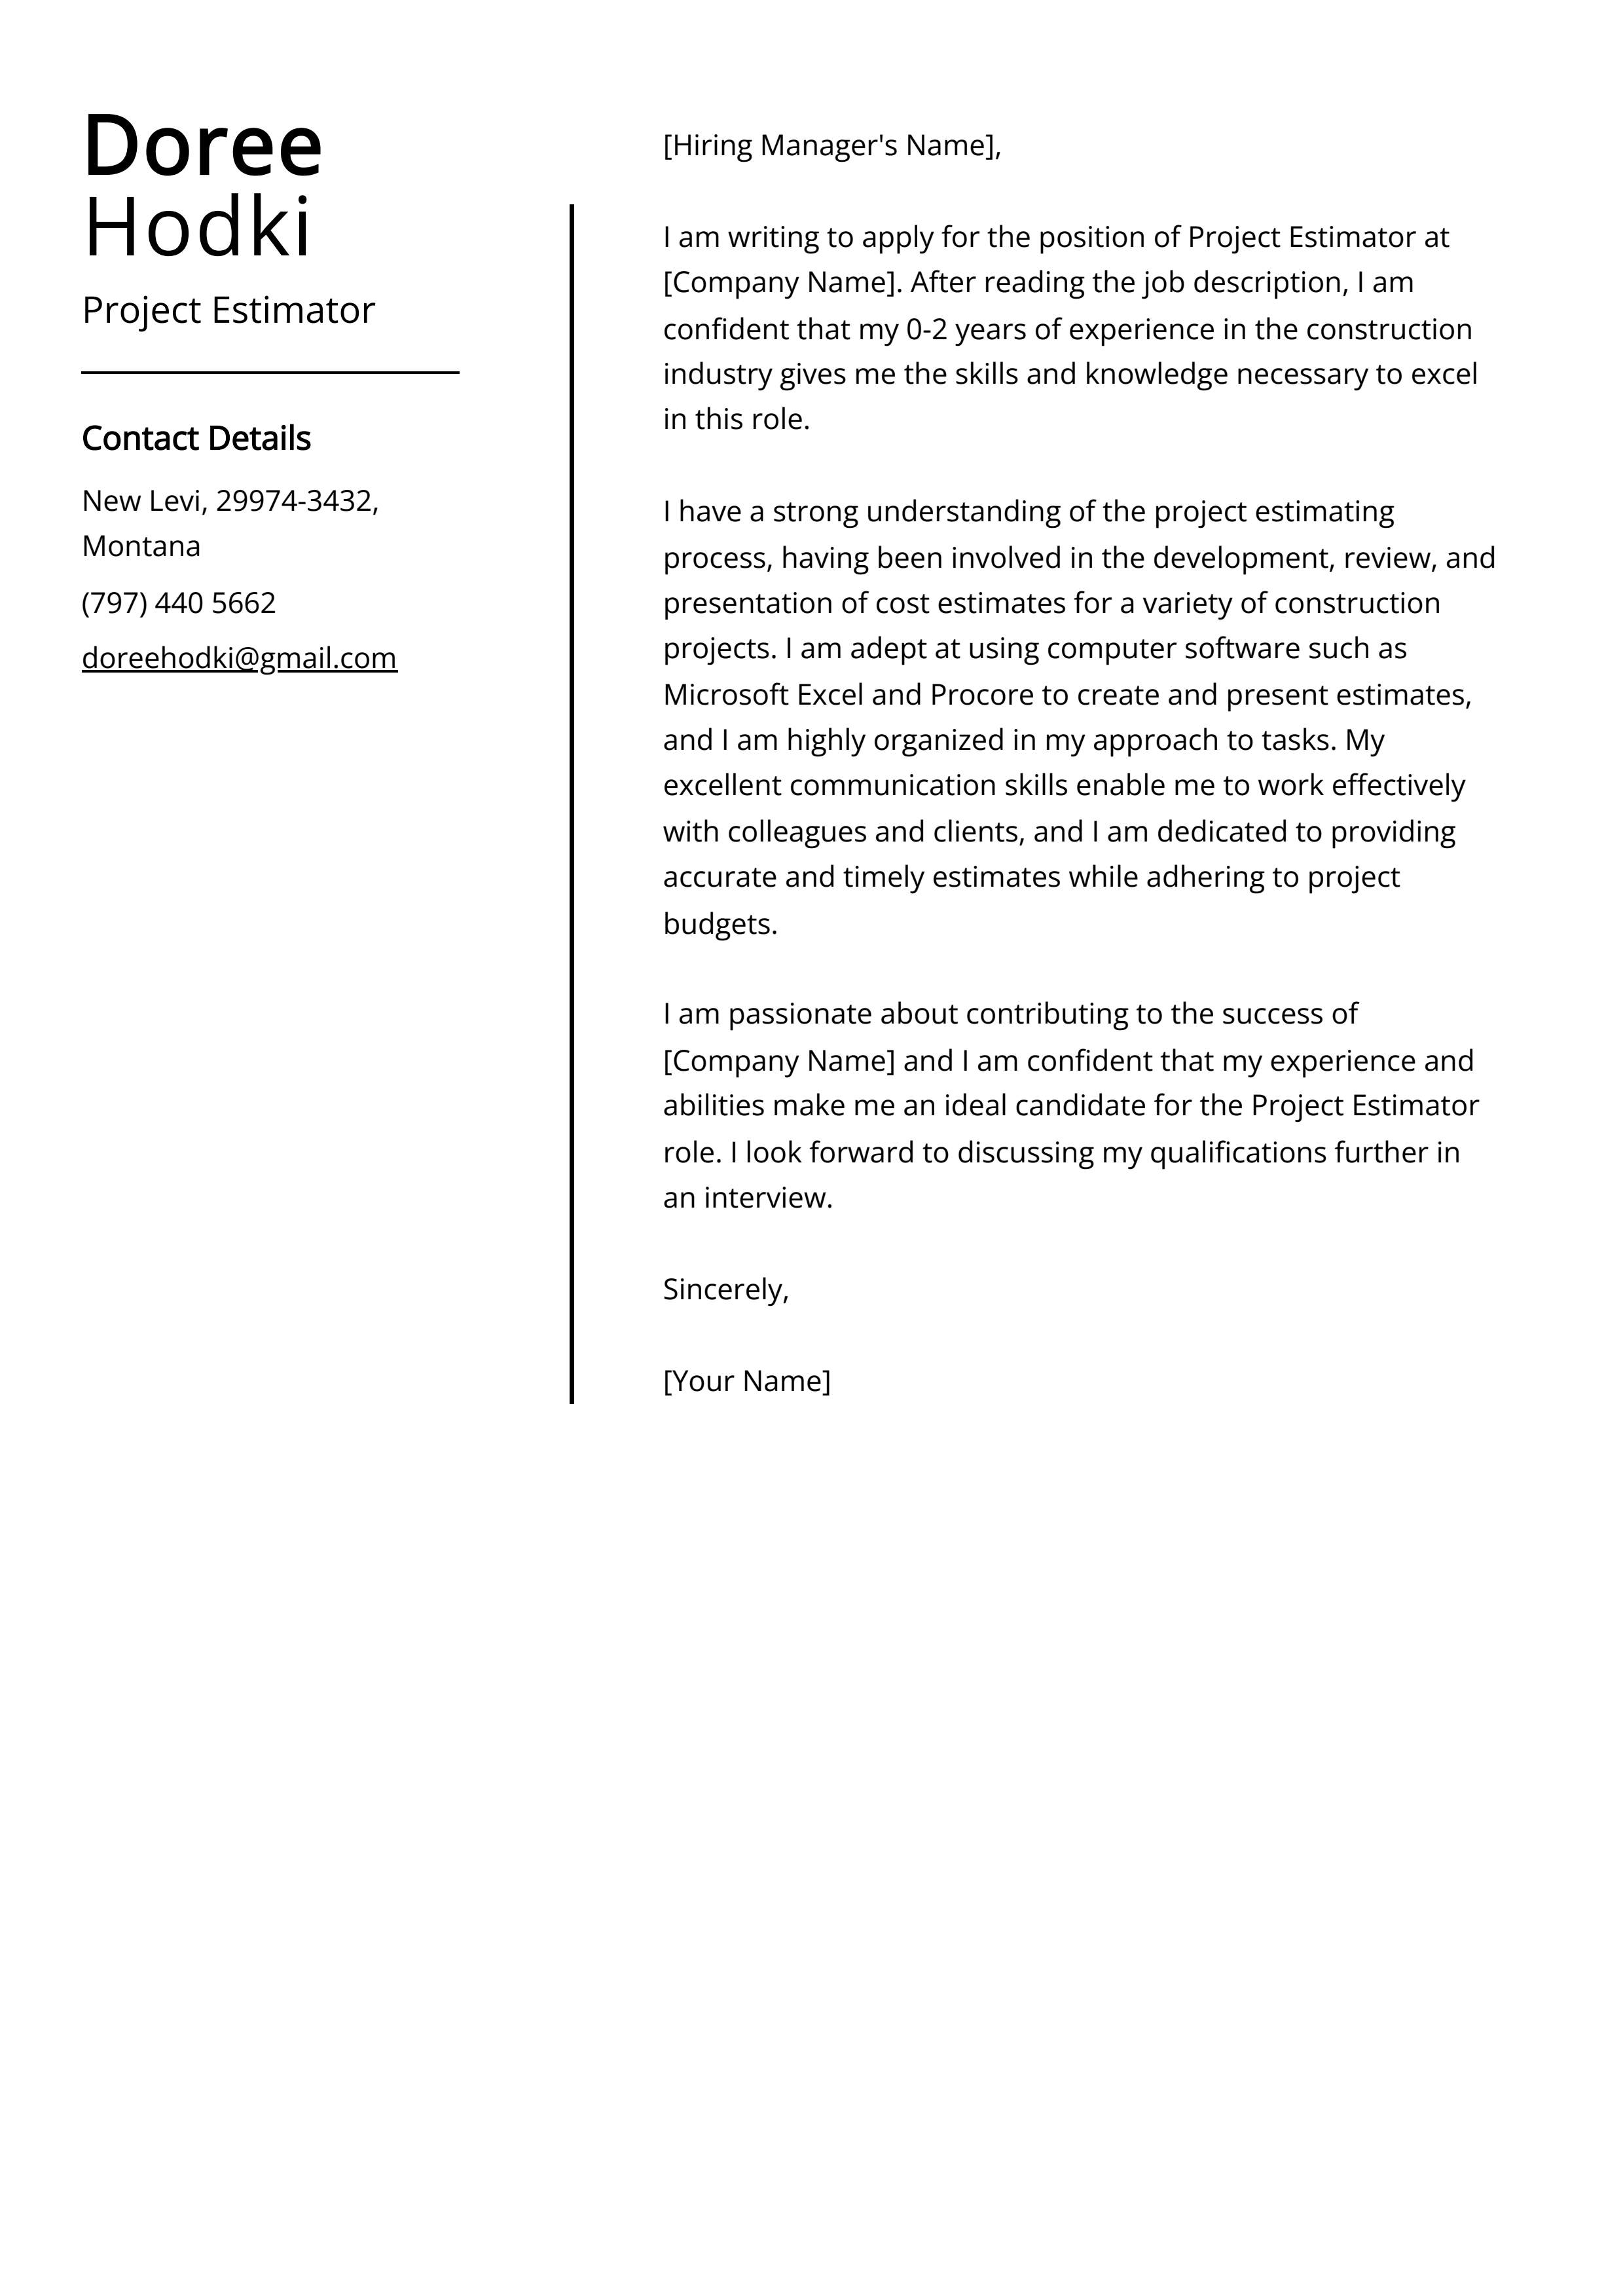 Project Estimator Cover Letter Example